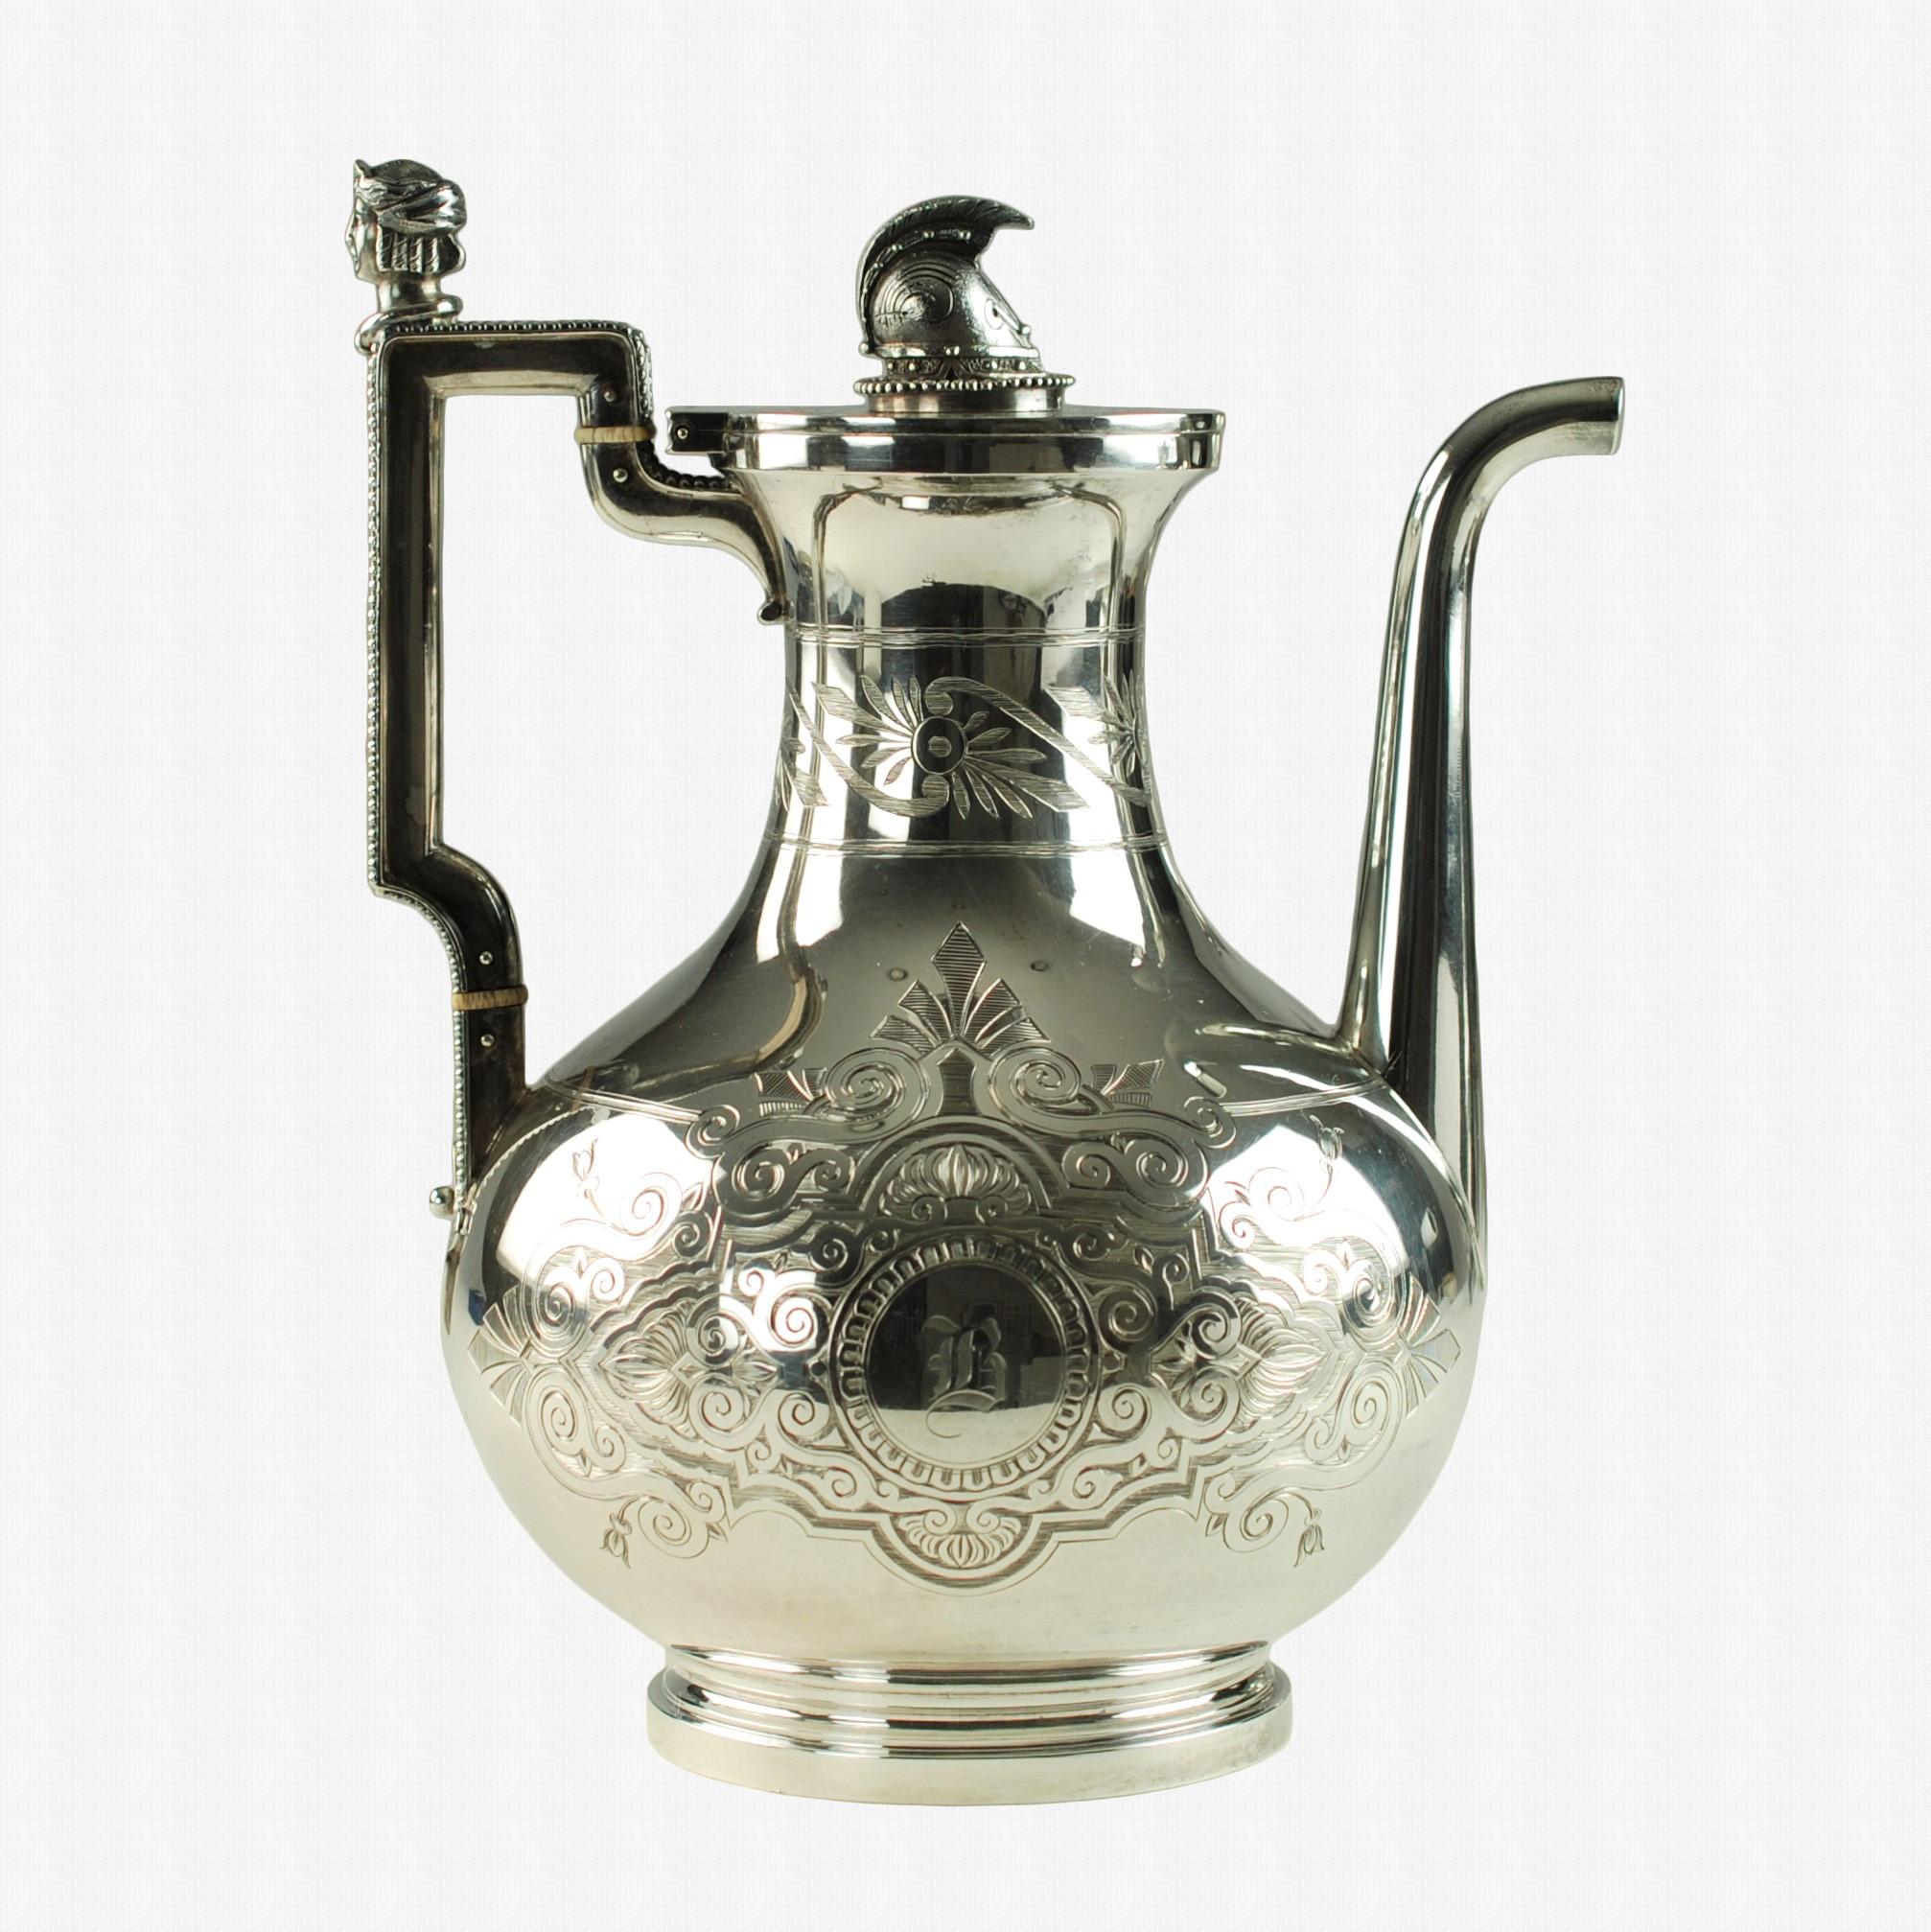 This neoclassical sterling silver tea and coffee set was designed by renowned 19th century silversmith, John R. Wendt (1826-1907). Recognized as 